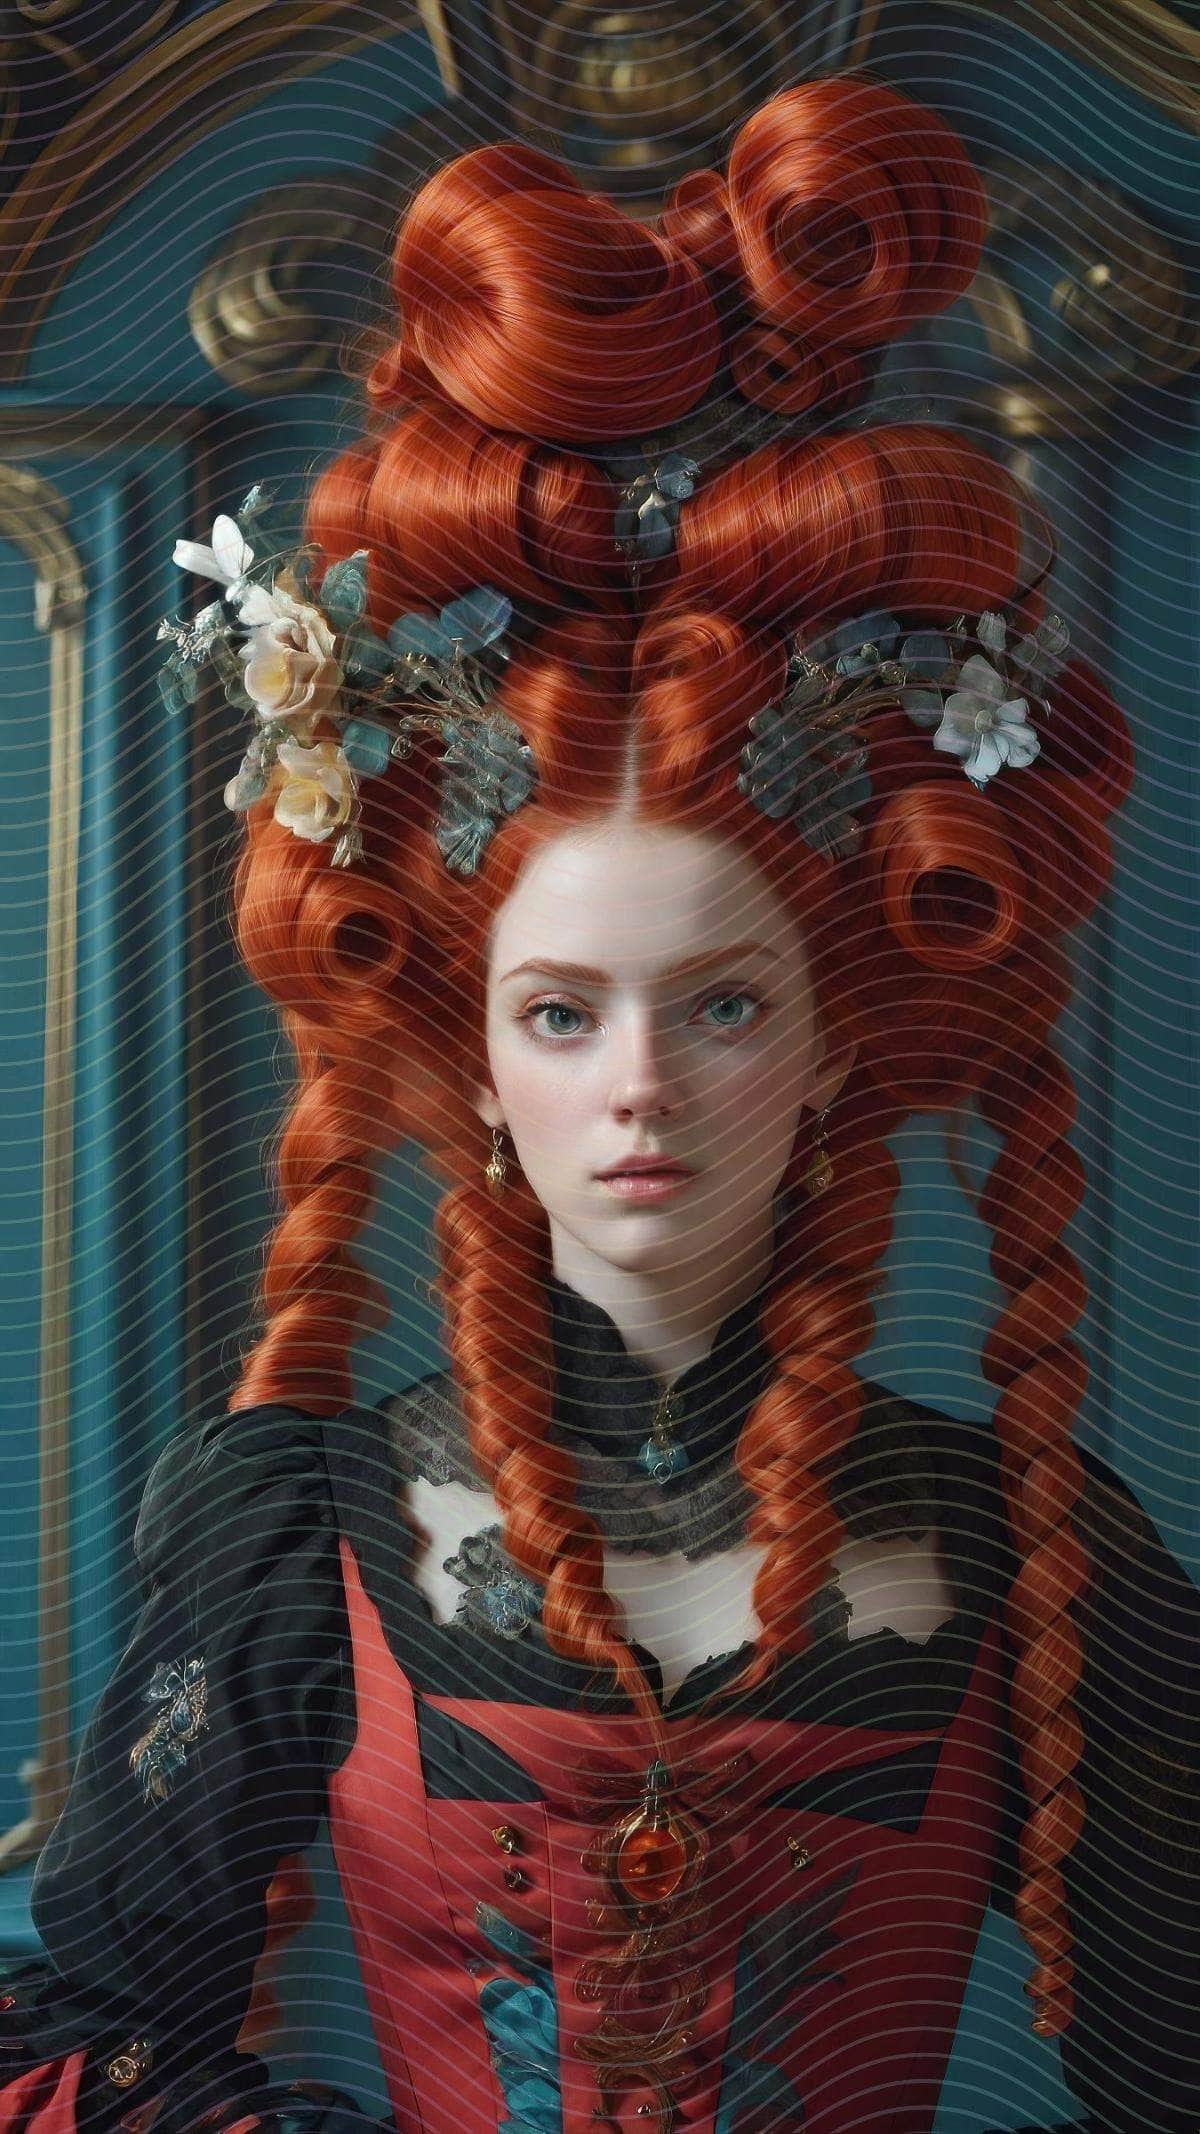 A Close-Up Portrait of A Gothic Woman in Red Exaggerated Hair